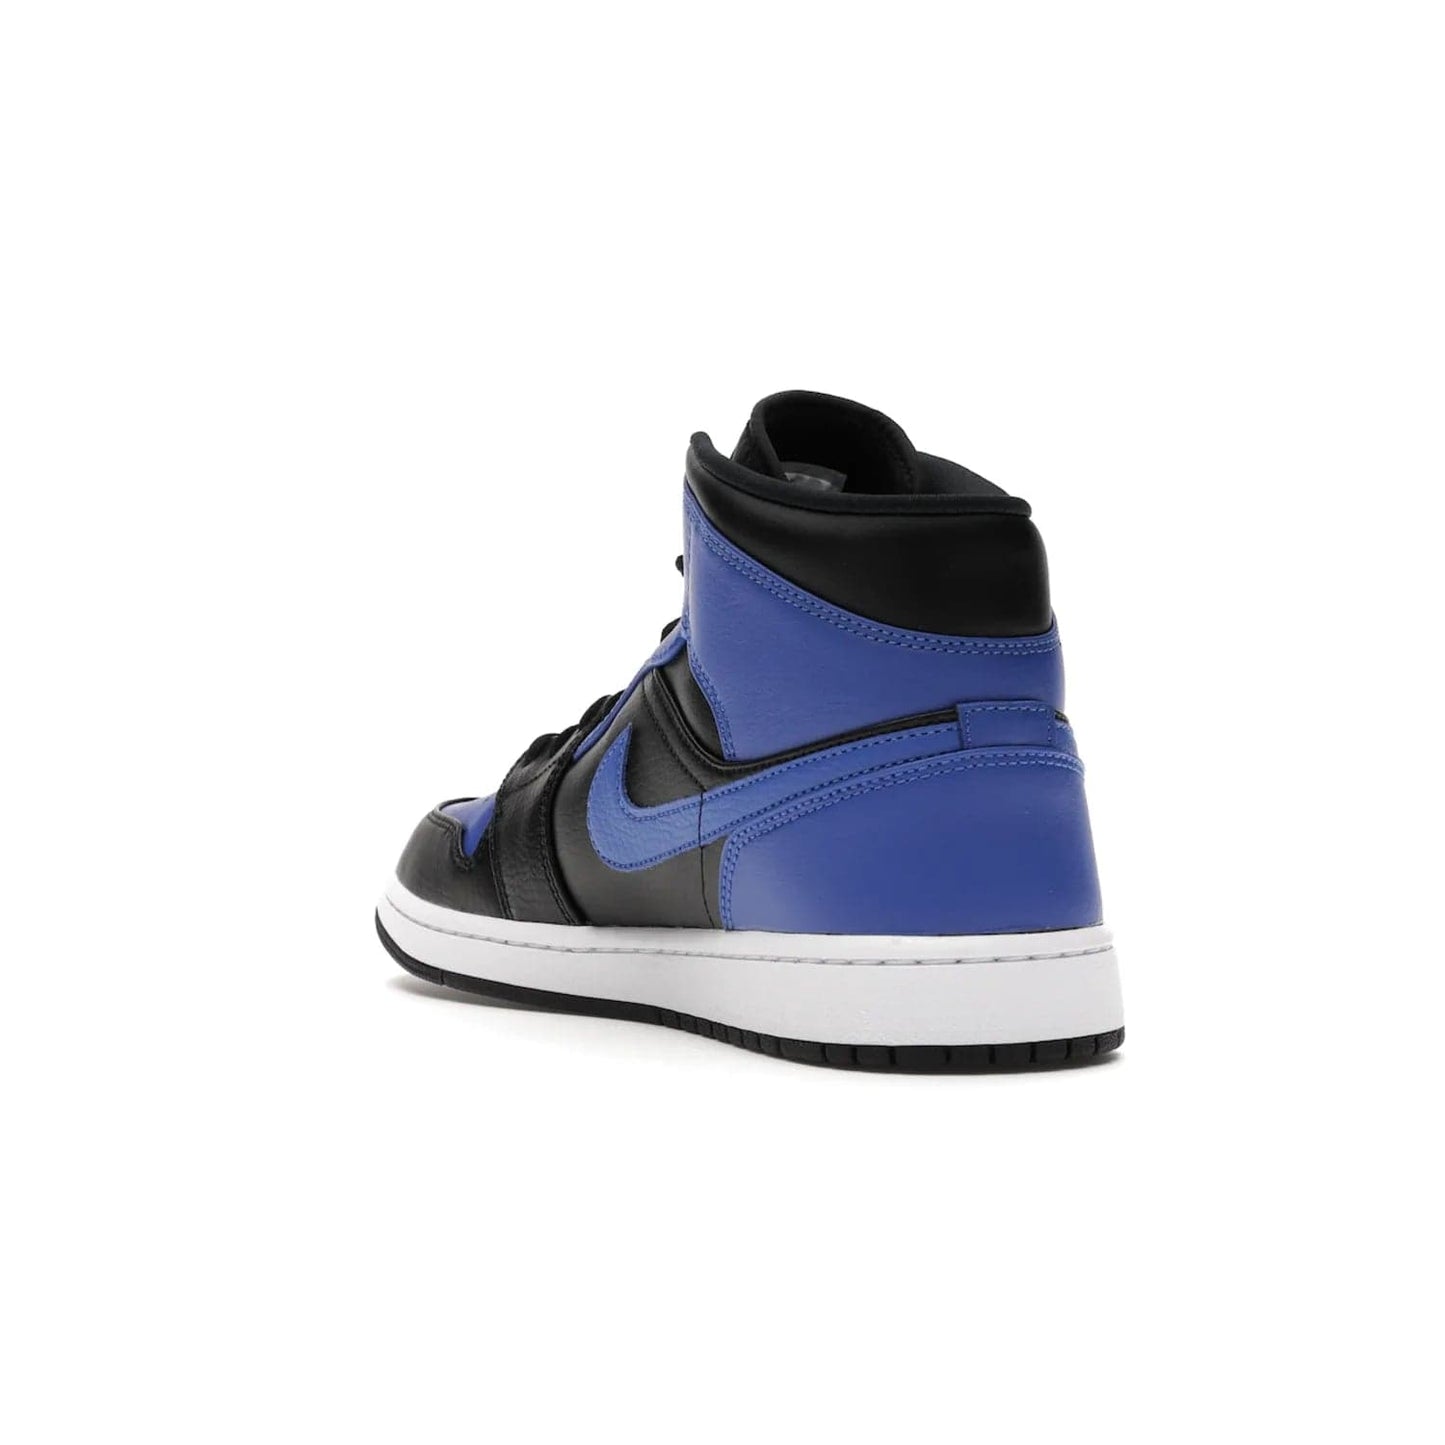 Jordan 1 Mid Hyper Royal Tumbled Leather - Image 25 - Only at www.BallersClubKickz.com - Iconic colorway of the Air Jordan 1 Mid Black Royal Tumbled Leather. Features a black tumbled leather upper, royal blue leather overlays, white midsole & black rubber outsole. Released December 2020. Adds premium style to any collection.